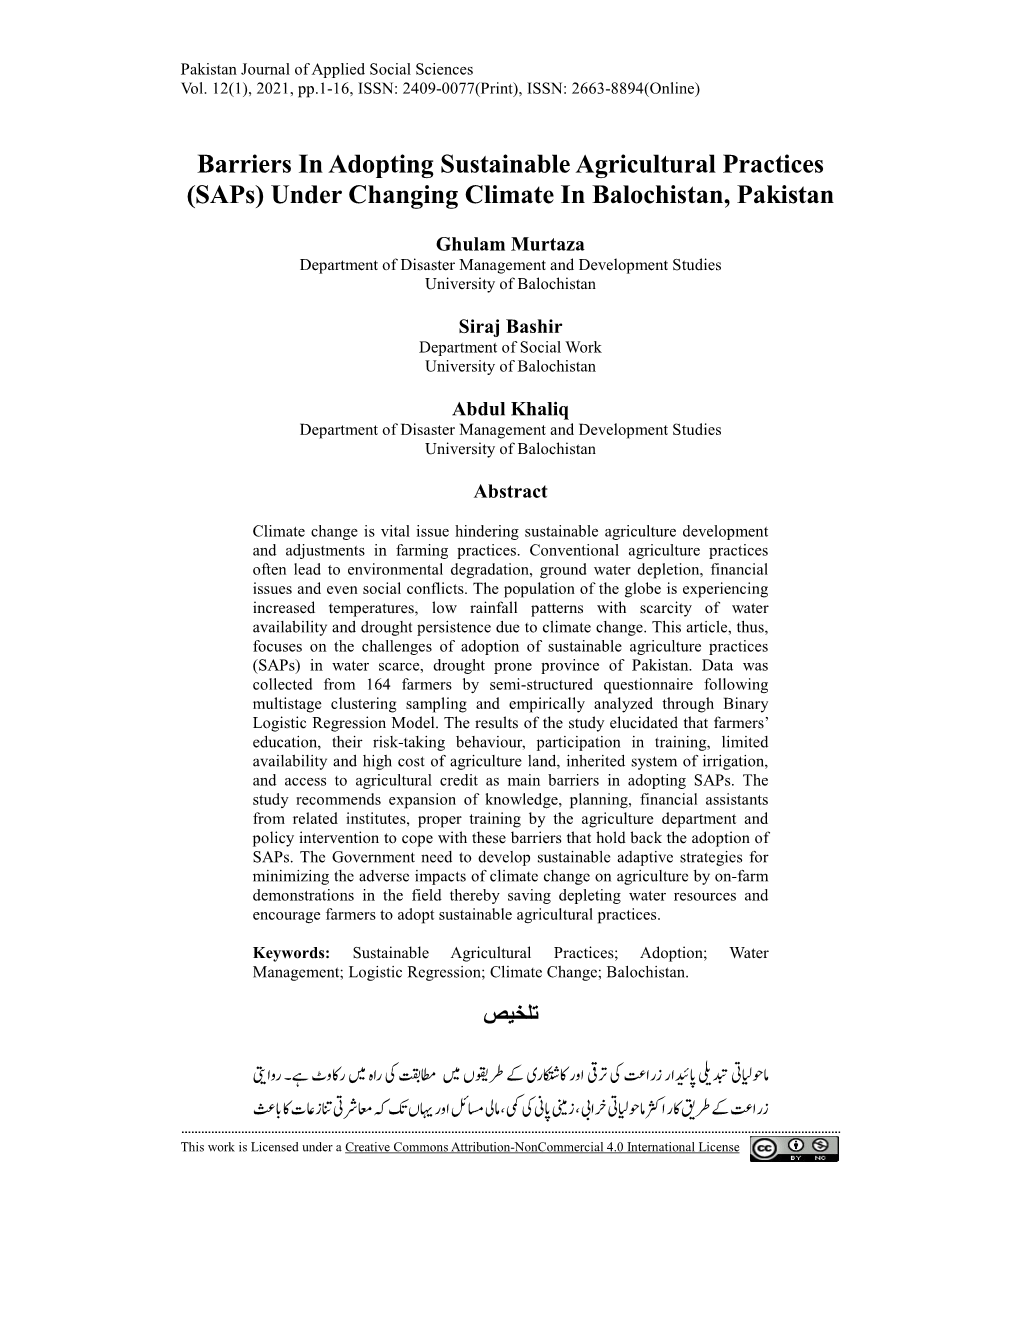 Barriers in Adopting Sustainable Agricultural Practices (Saps) Under Changing Climate in Balochistan, Pakistan